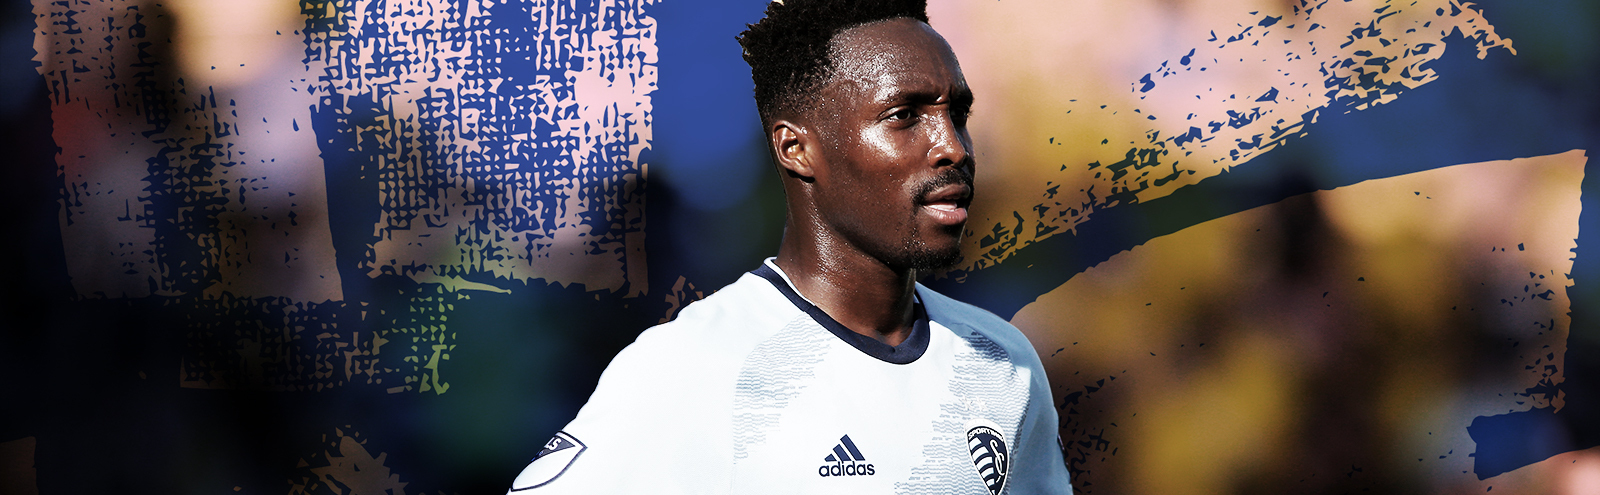 gerso sporting kc